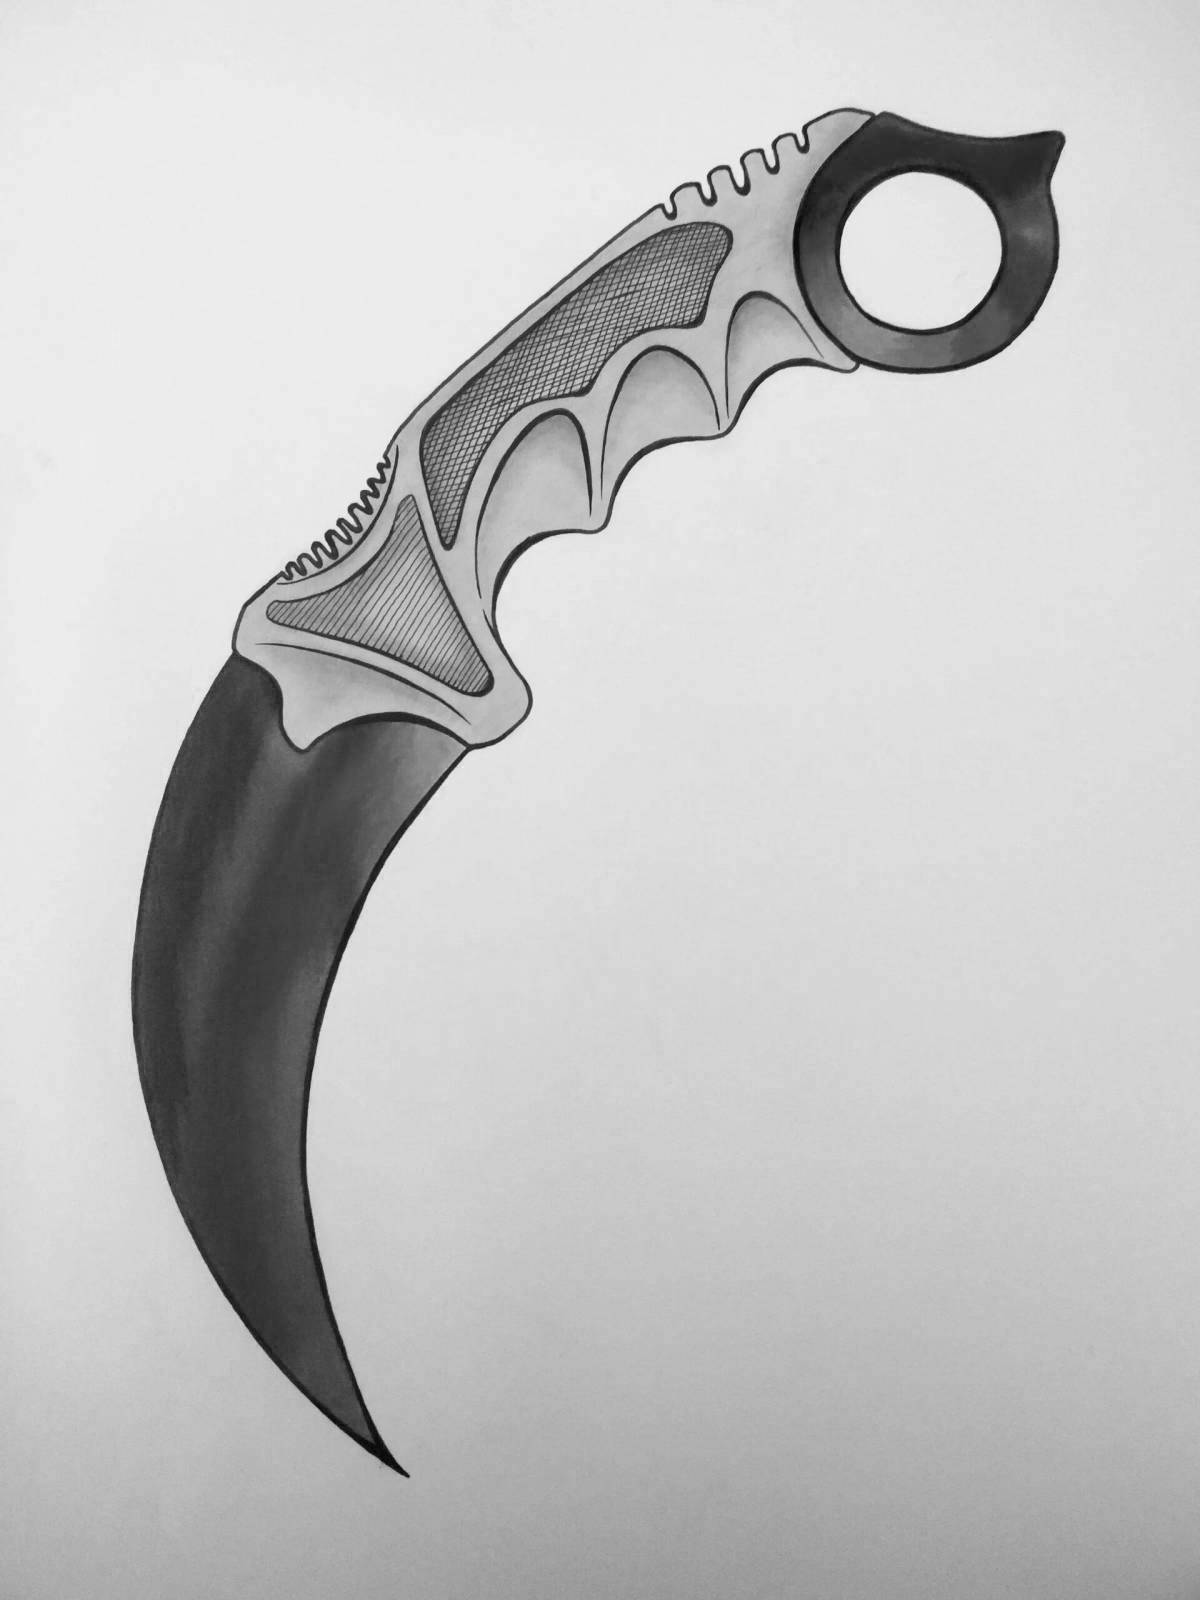 Coloring book gorgeous karambit knife from standoff 2